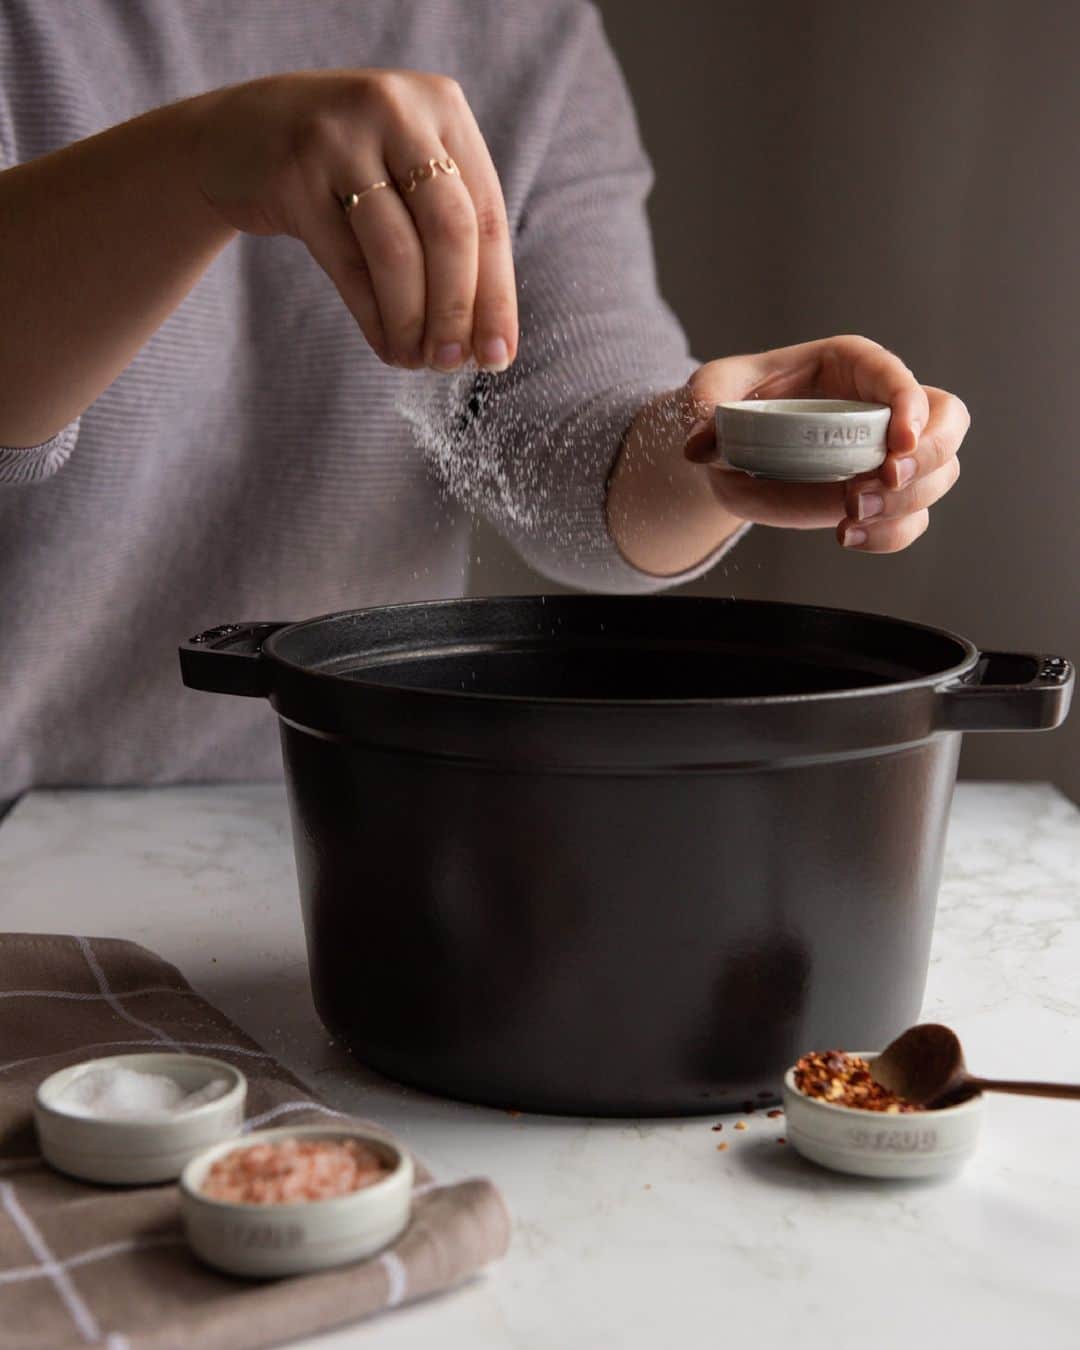 Staub USA（ストウブ）のインスタグラム：「Our condiment dishes are perfect for holding small amounts of herbs or spices while prepping your ingredients, or for serving salt and pepper at your table. This sleek enameled stoneware is an elegant addition to your kitchen, featuring clean lines and a beautiful speckled finish. Swipe to get a closer look at the lovingly crafted details 👉 #madeinstaub」